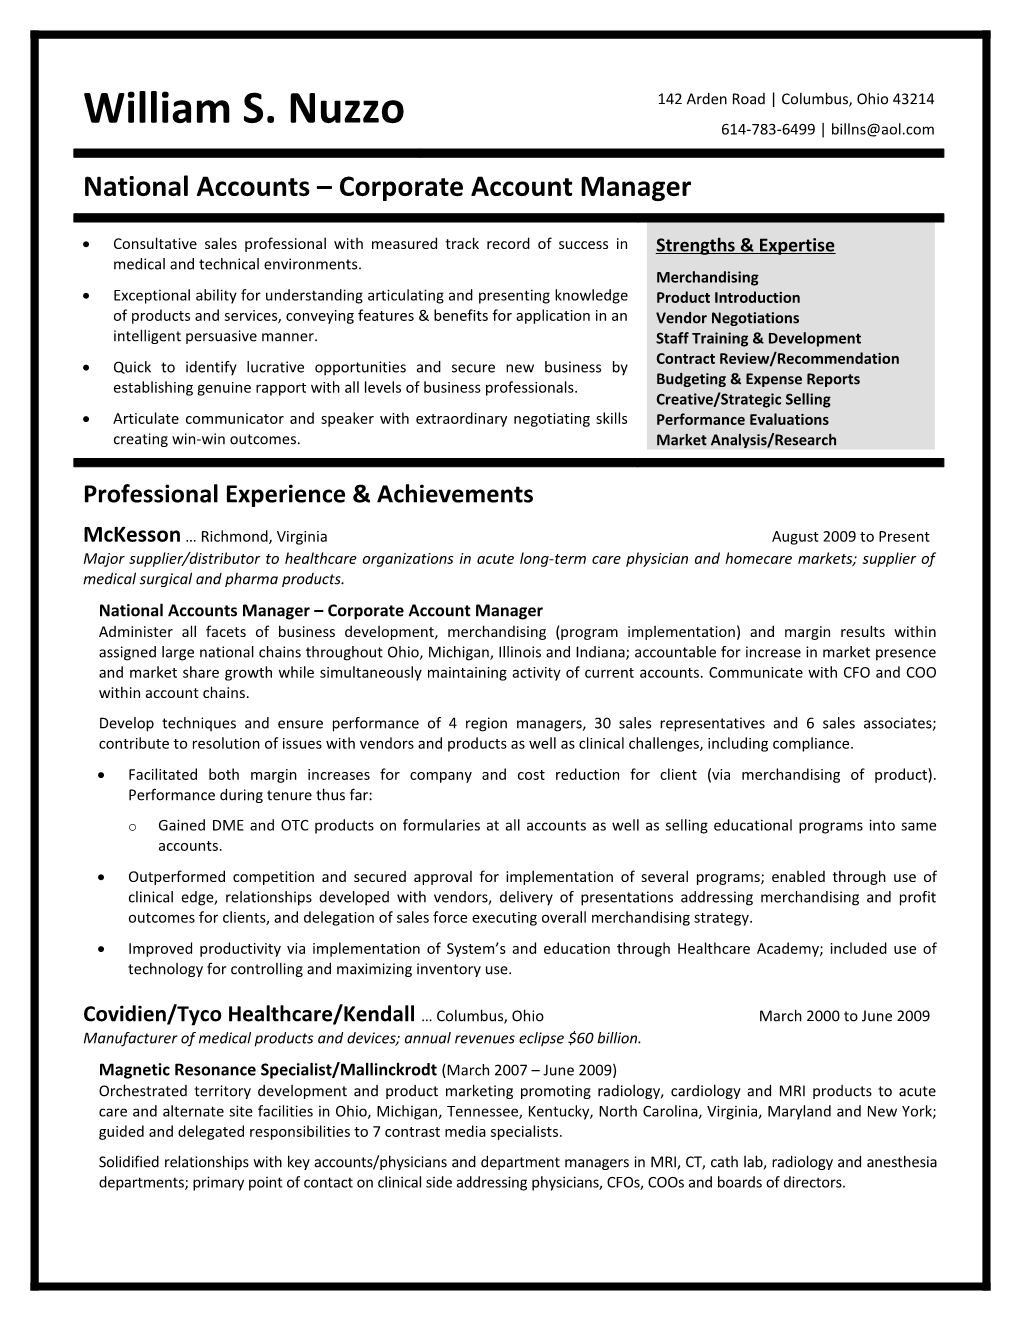 National Accounts Manager Corporate Account Manager